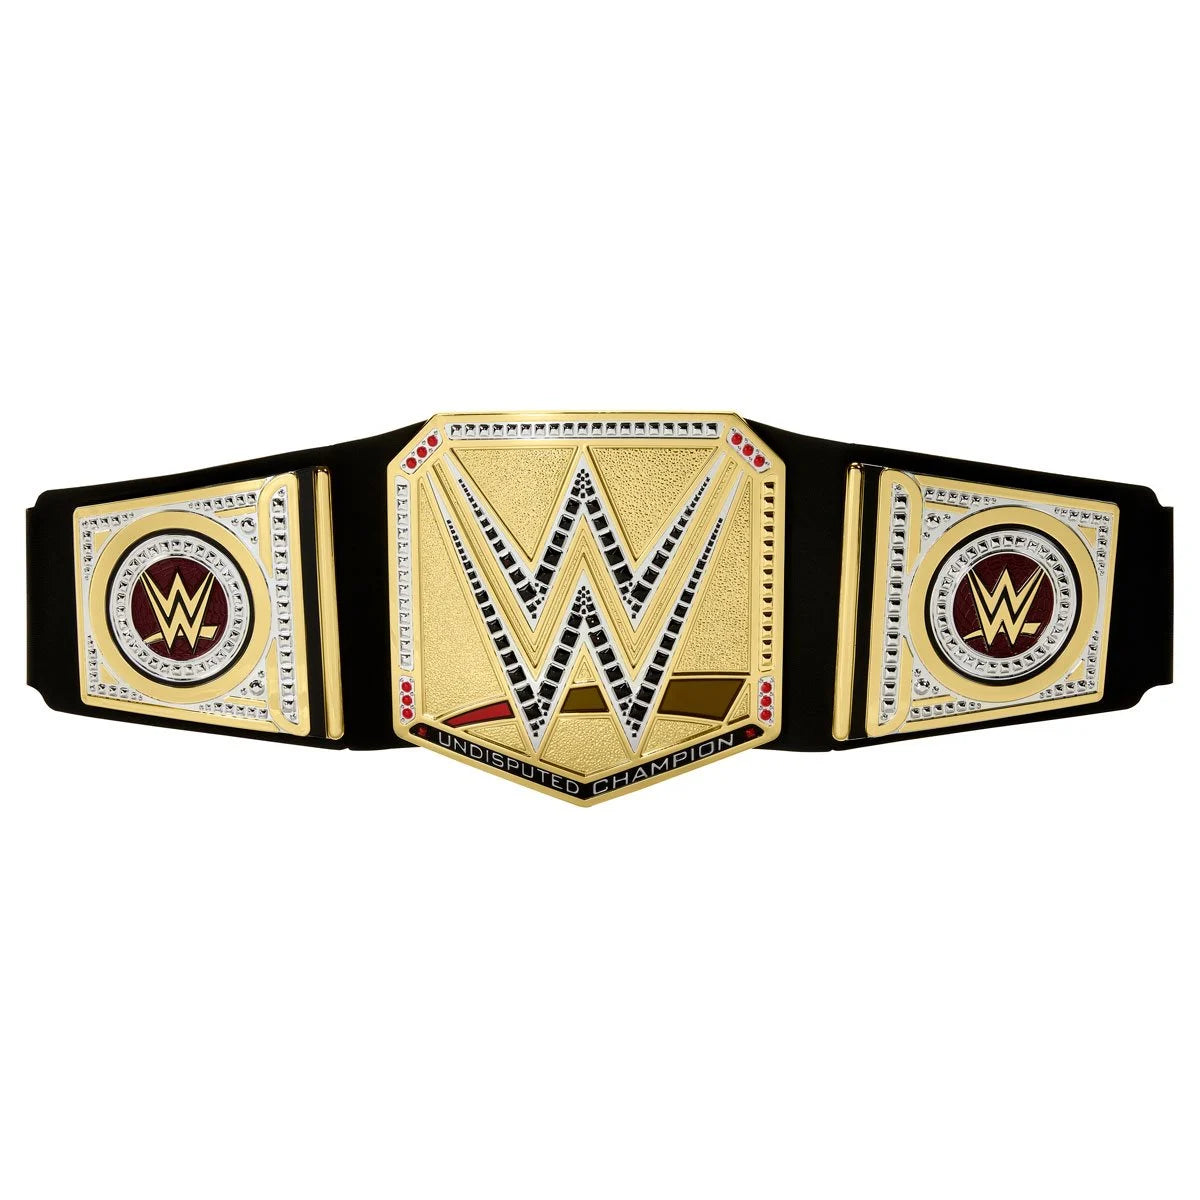 WWE New Undisputed Universal Title Kids Children Roleplay Offical Licensed Toy Belt